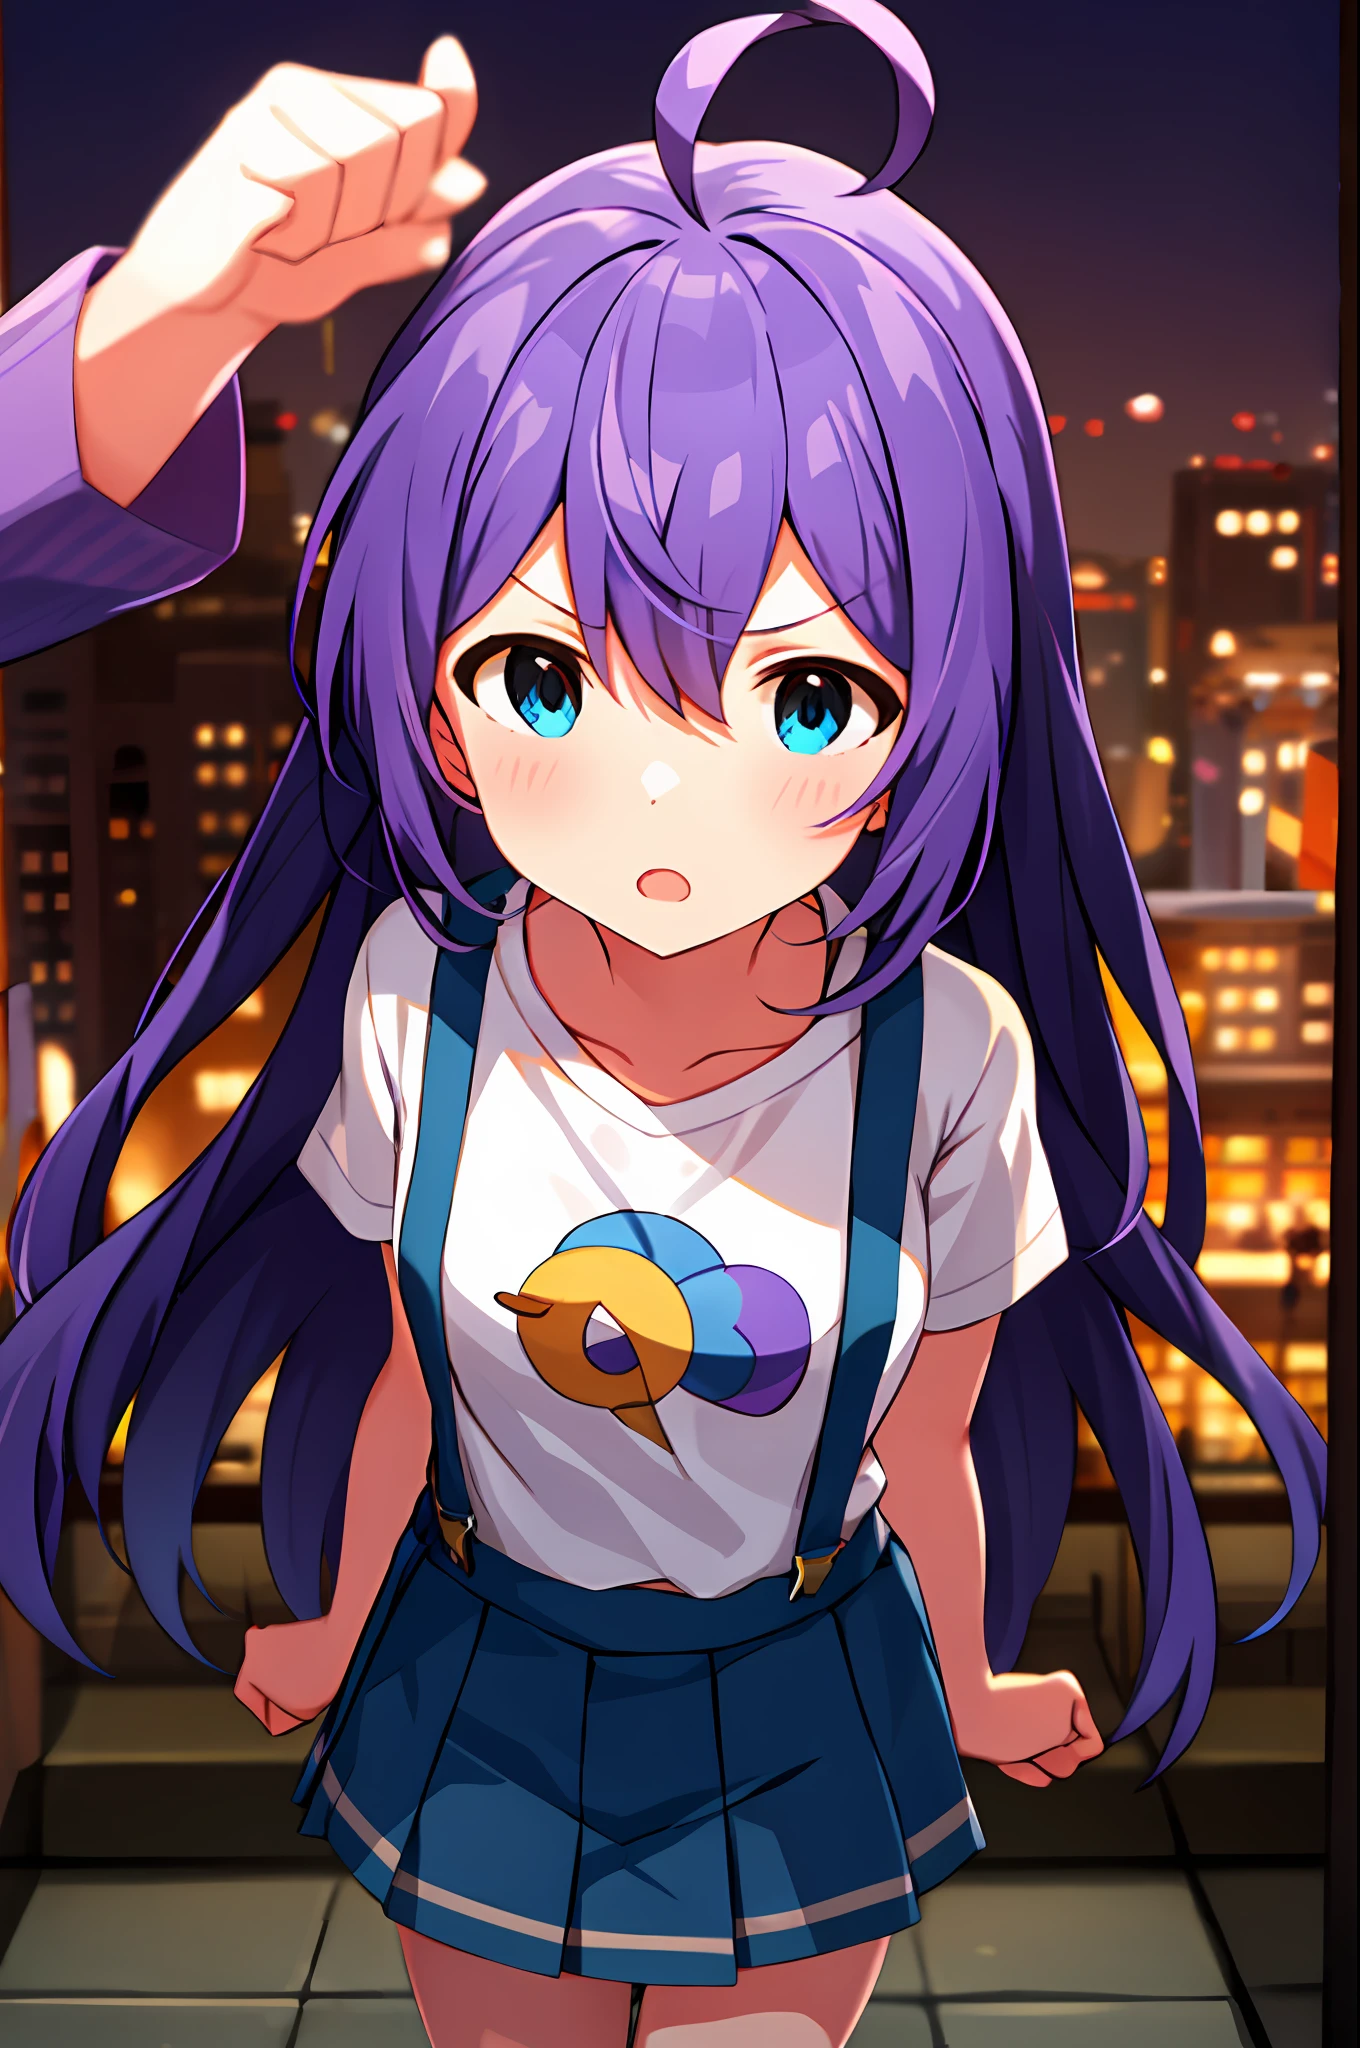 mochizuki anna,1girls,Solo,Long hair,Purple hair,Small_Ahoge,Blue eyes.Short stature.white t-shirts.suspenders.Skirt.Night view.fighting stance.Despair face.Clench your fists.look from above.Opening Mouth.Be proud.Angel wings.